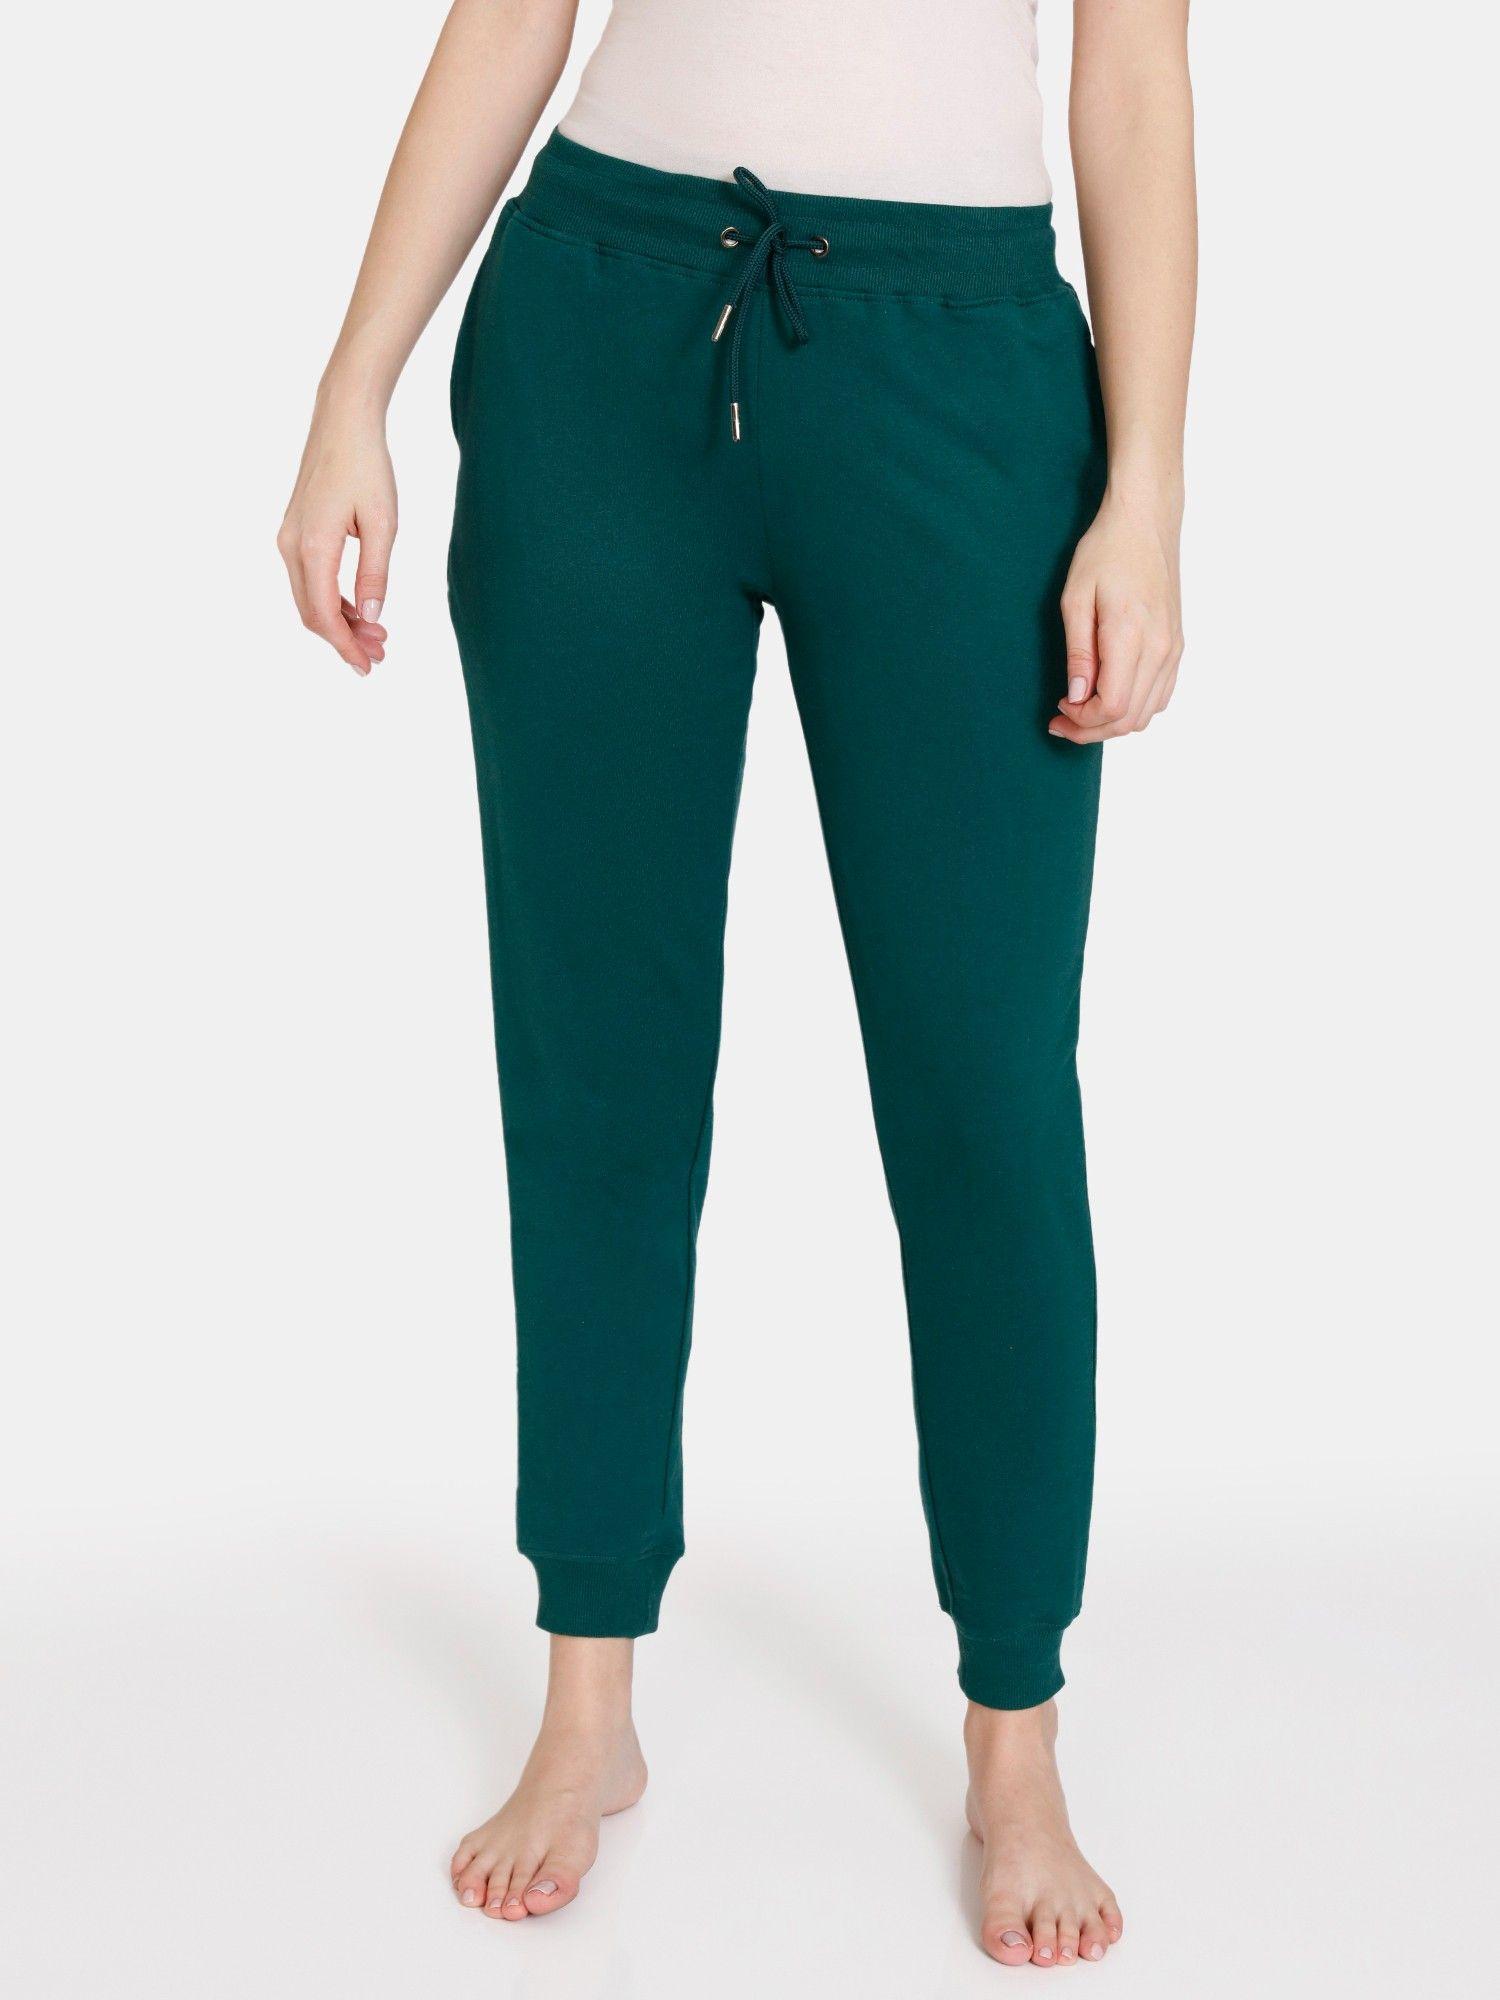 winter refresh terry fabric knit cotton lounge pant - rain forest green